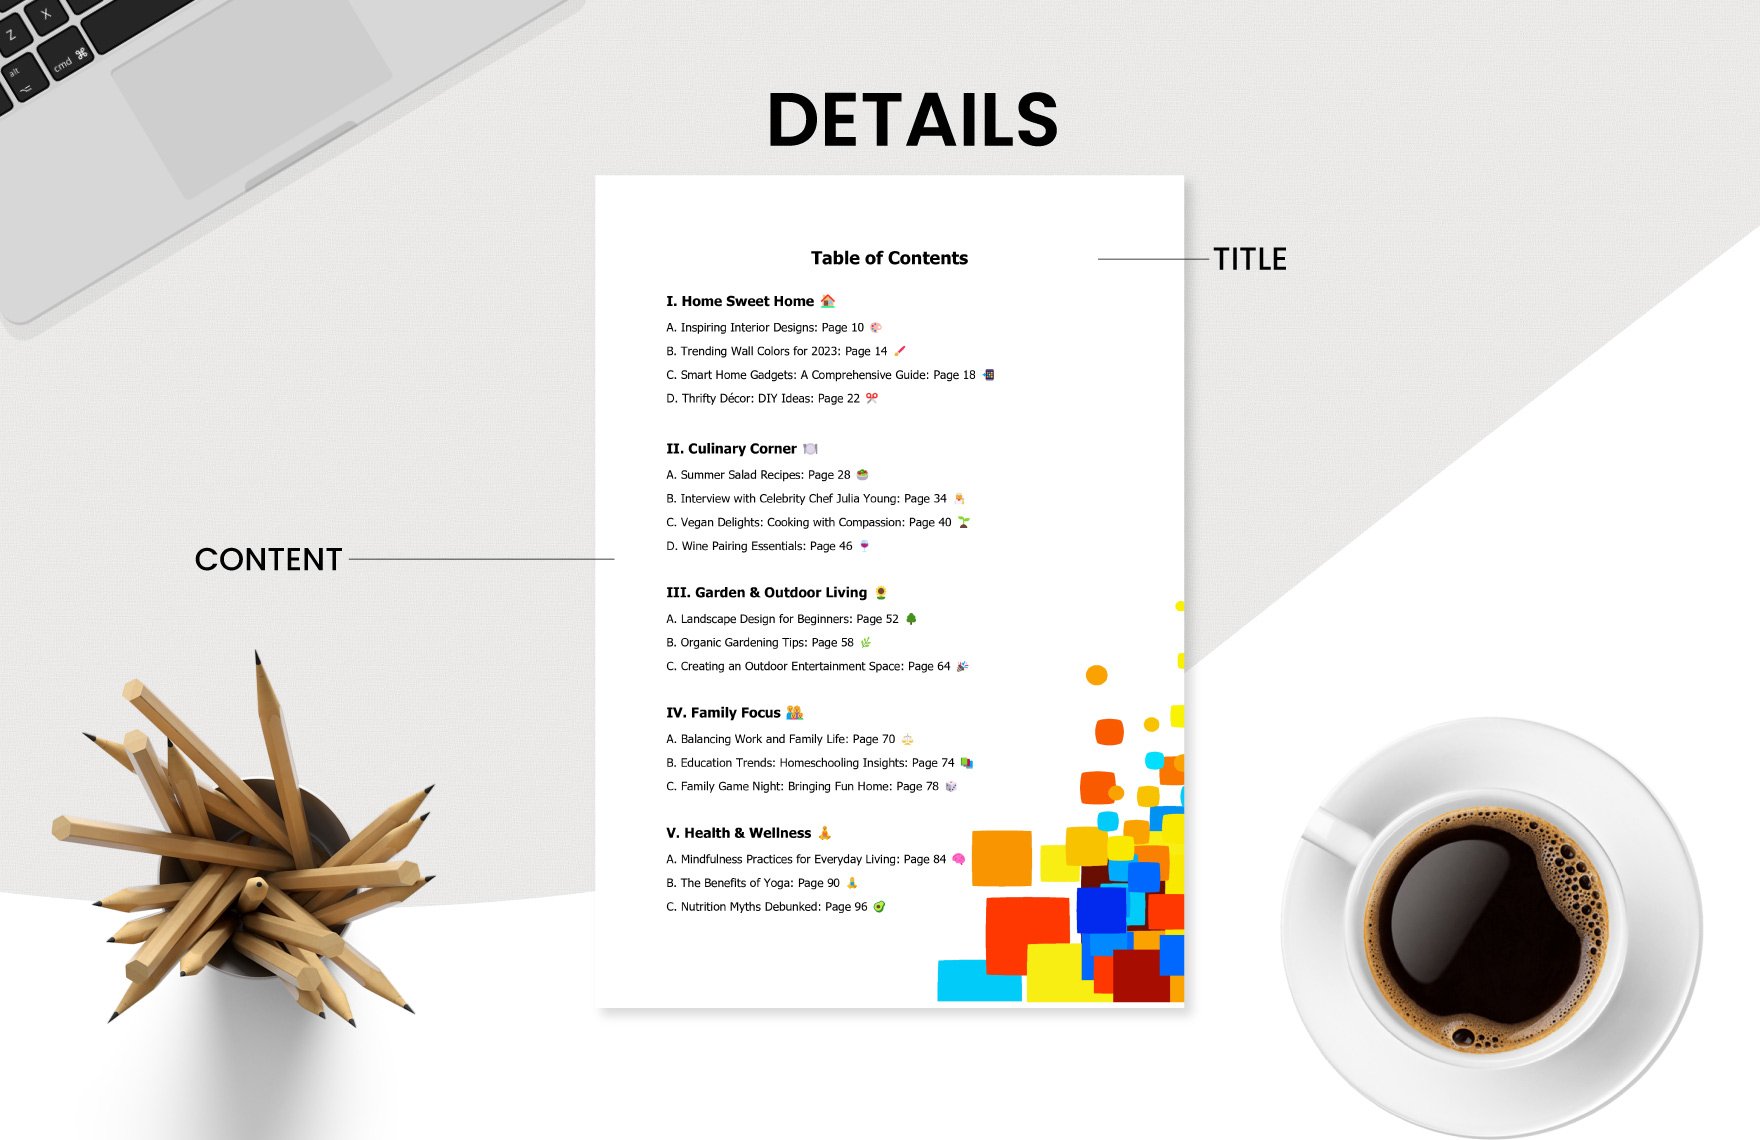 Magazine Table Of Contents Template